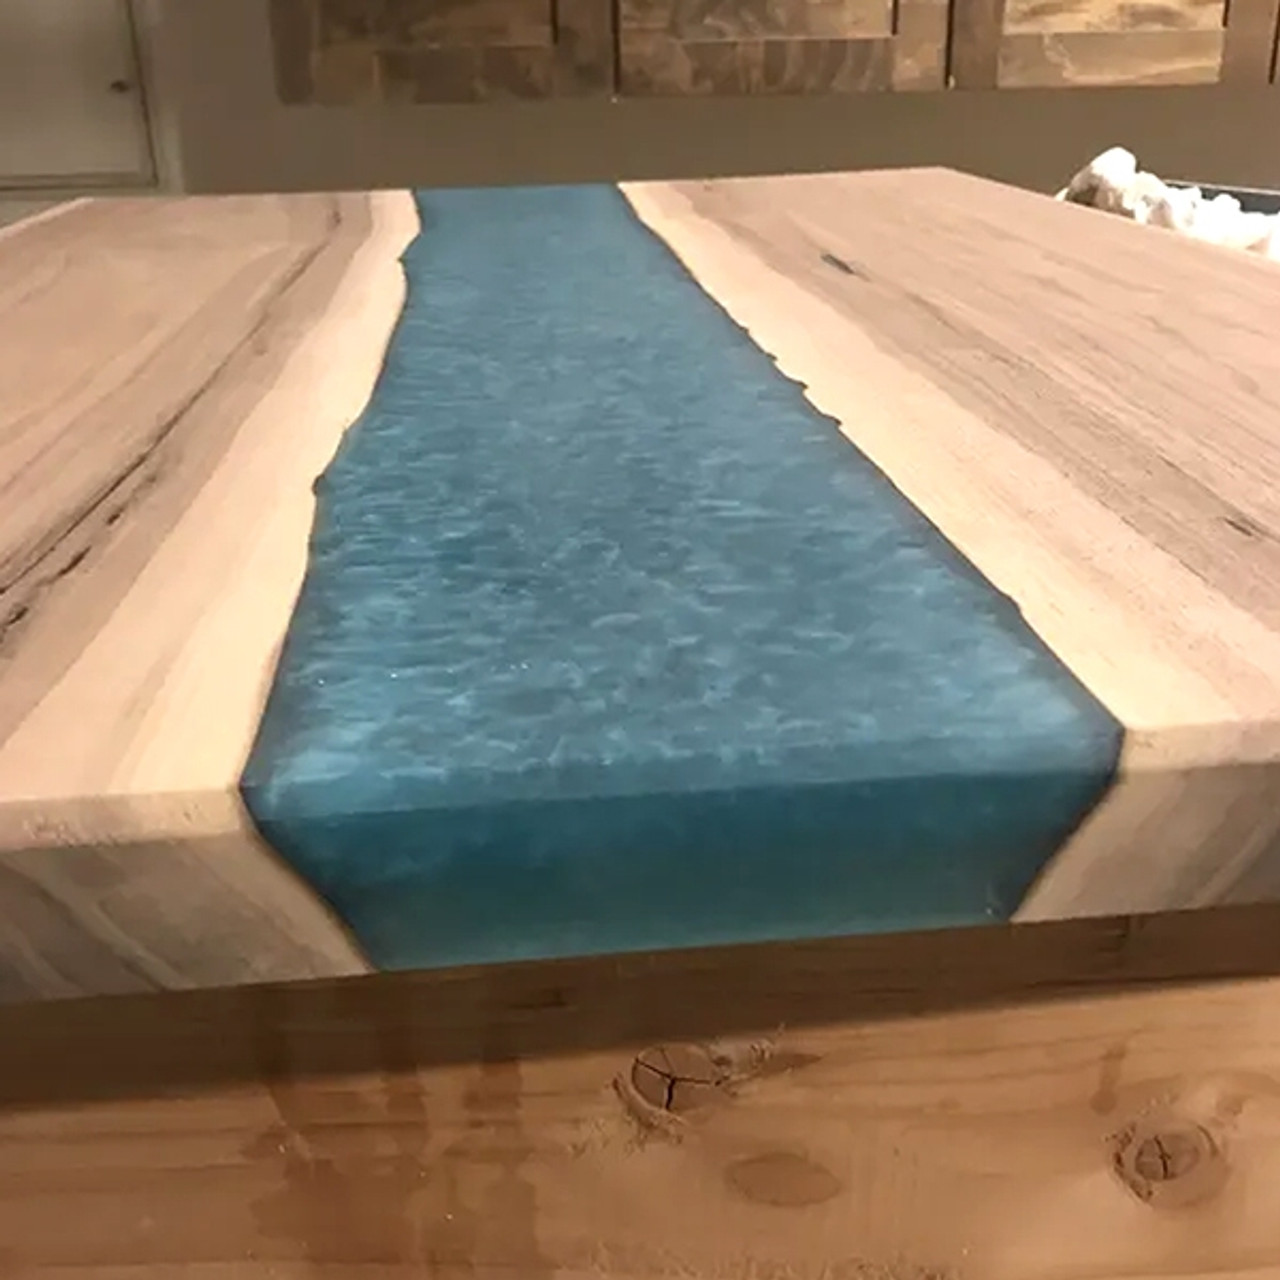 How To: Total Boat Epoxy Resin On Custom Boat Deck 